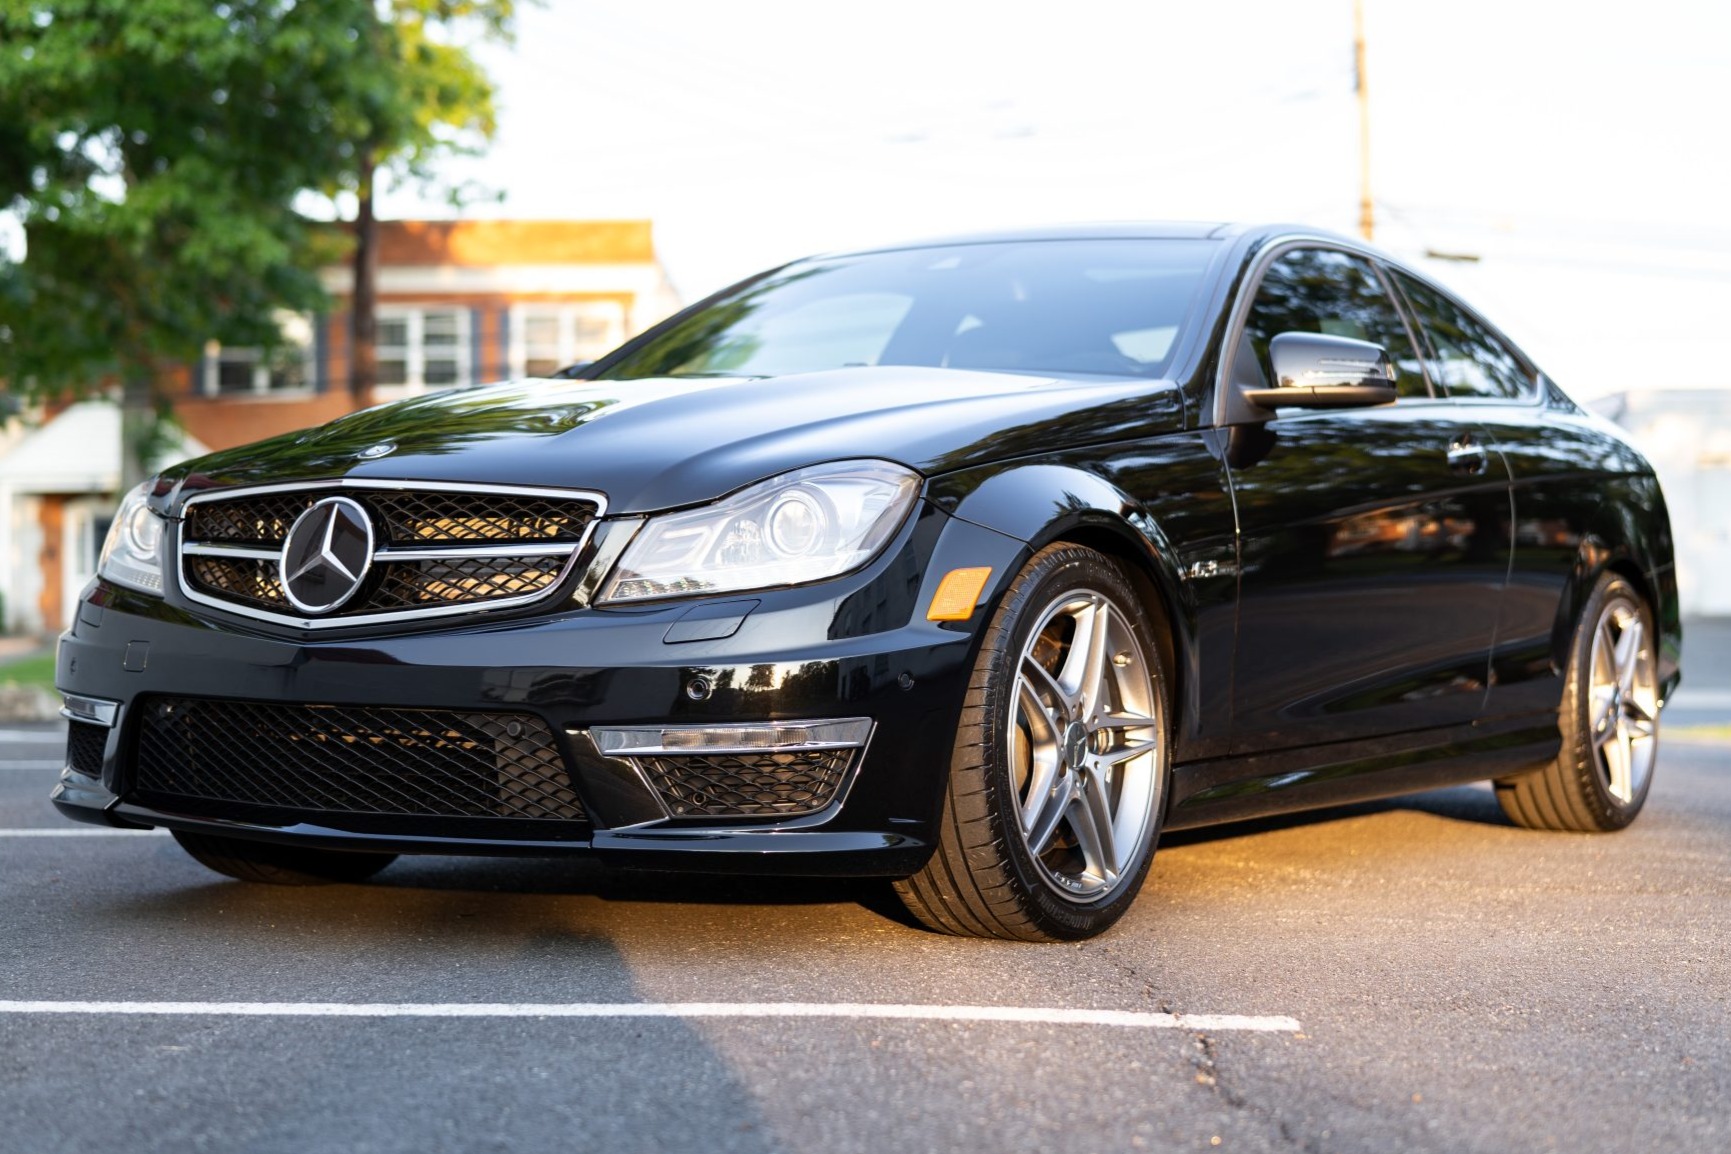 Used 8k-Mile 2013 Mercedes-Benz C63 AMG Coupe Review